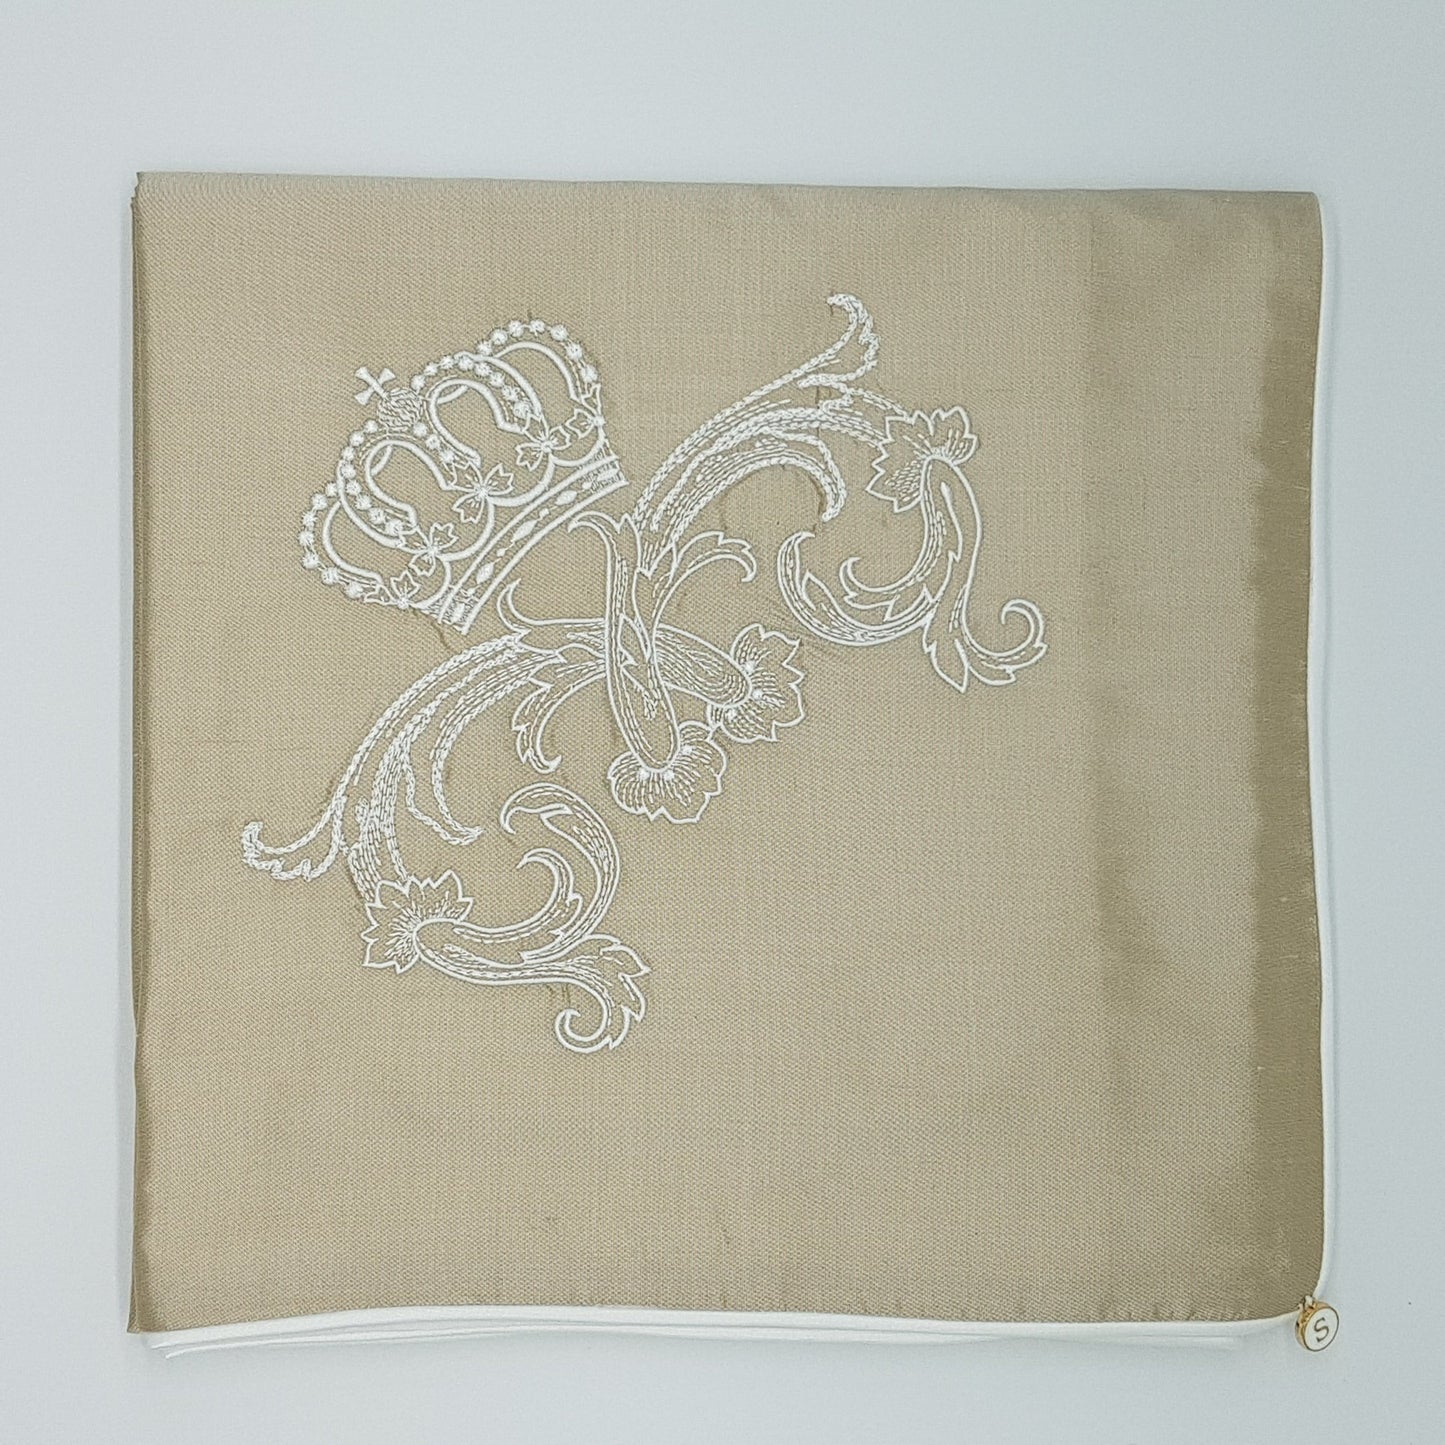 Limited Edition Baby Wrap and Pillowcase Set, Coffee Silk with cream embroidery